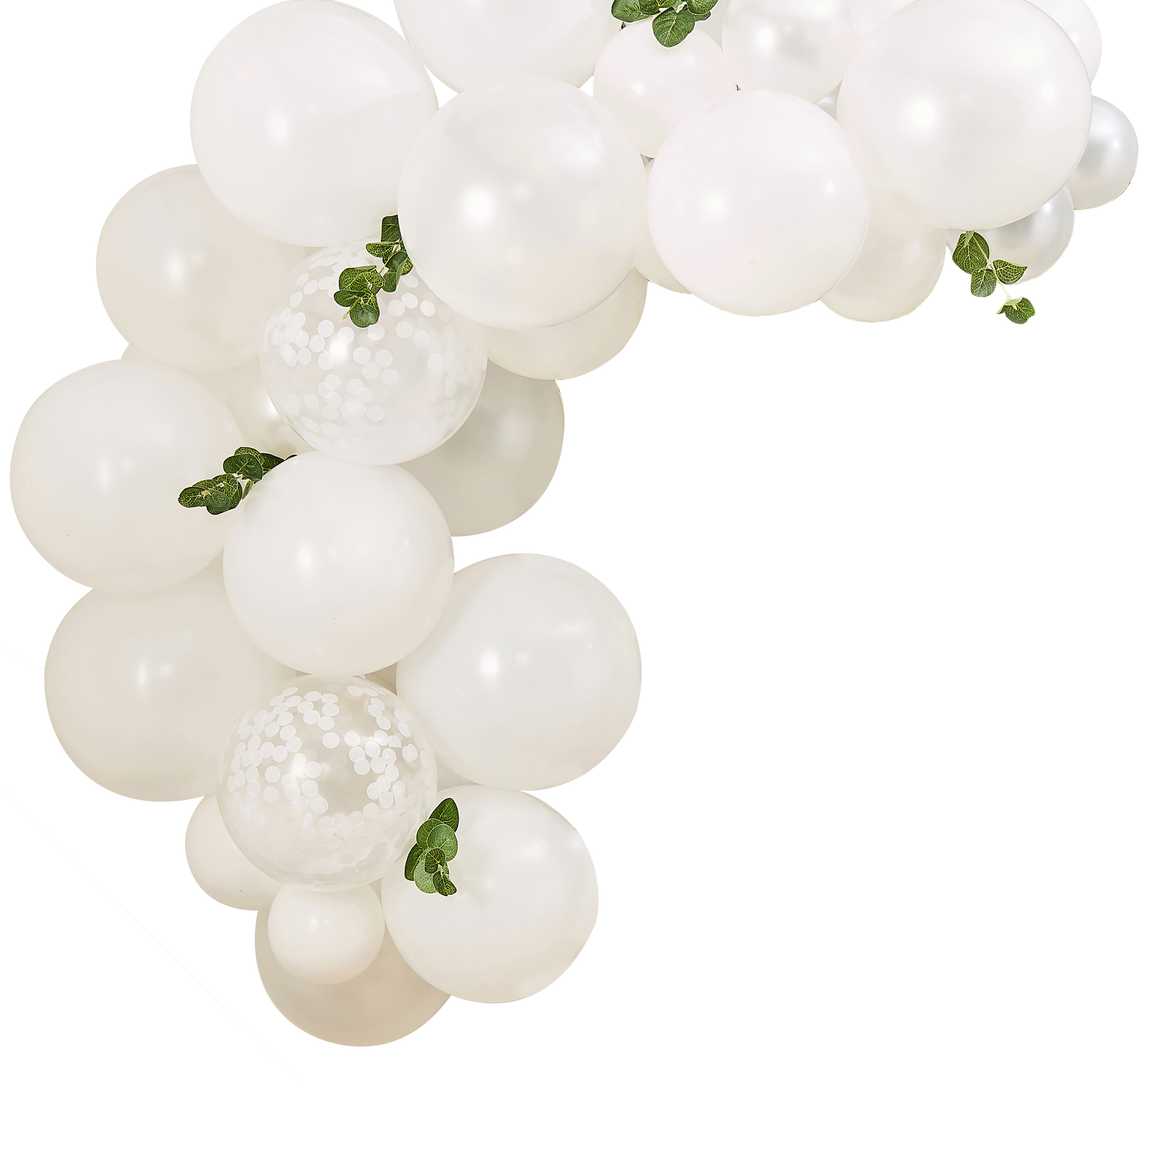 Ginger Ray White Balloon Arch Kit With Foliage Pack of 45